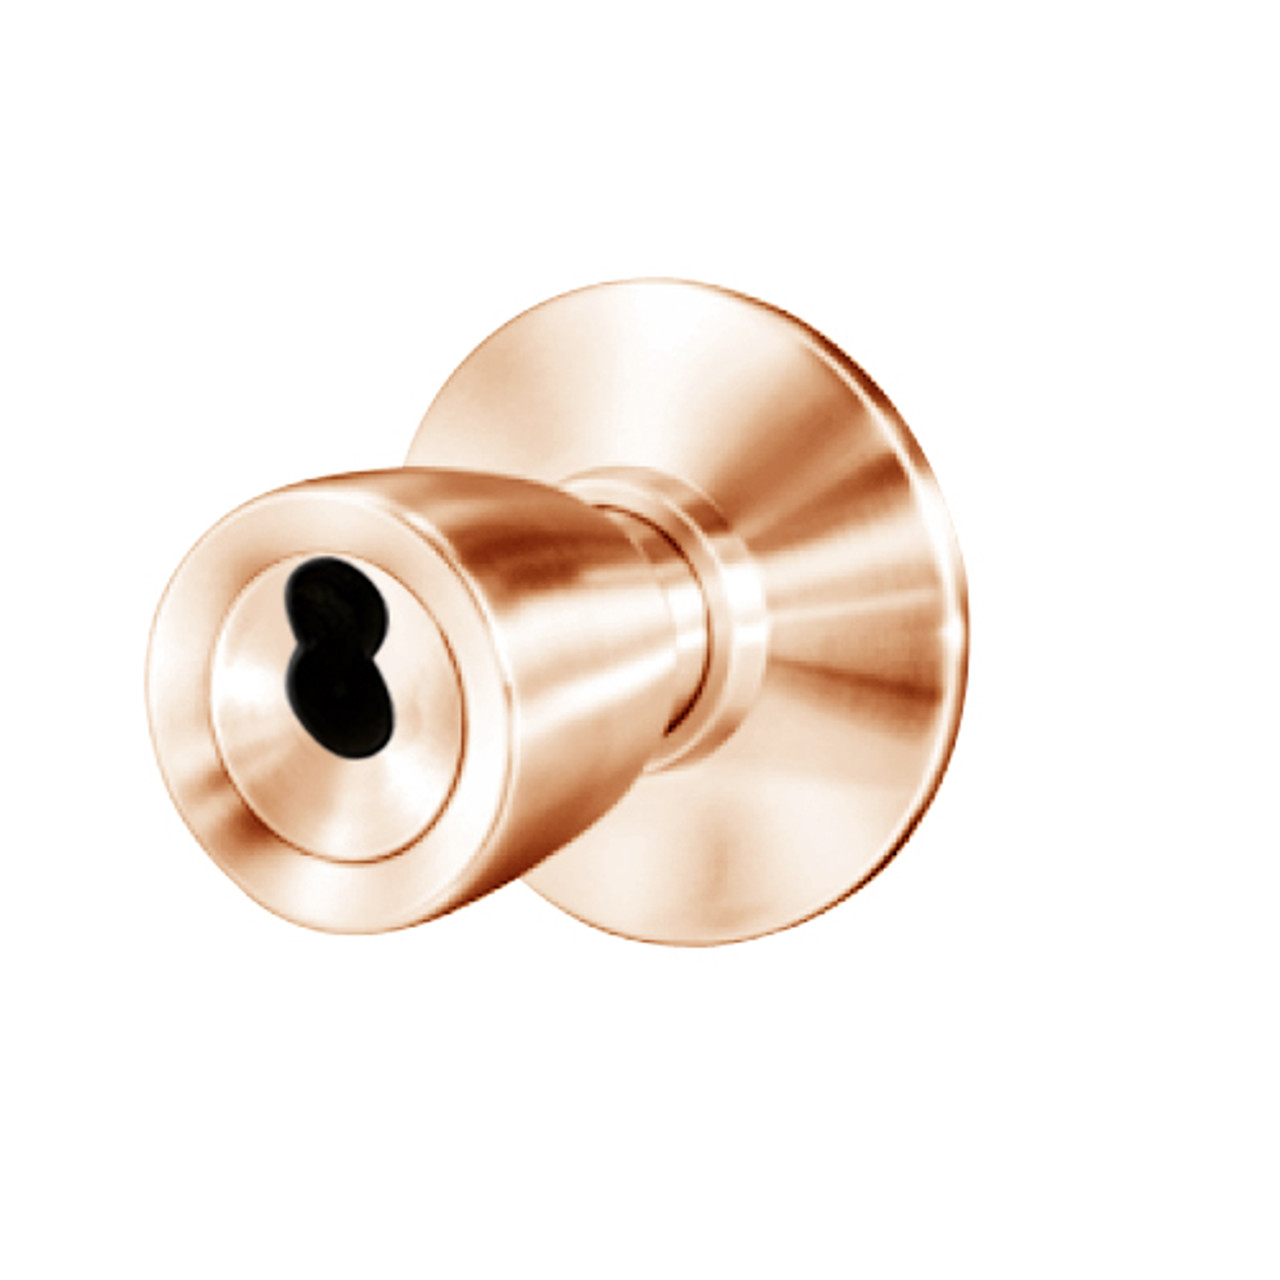 8K37XR6DS3611 Best 8K Series Special Heavy Duty Cylindrical Knob Locks with Tulip Style in Bright Bronze